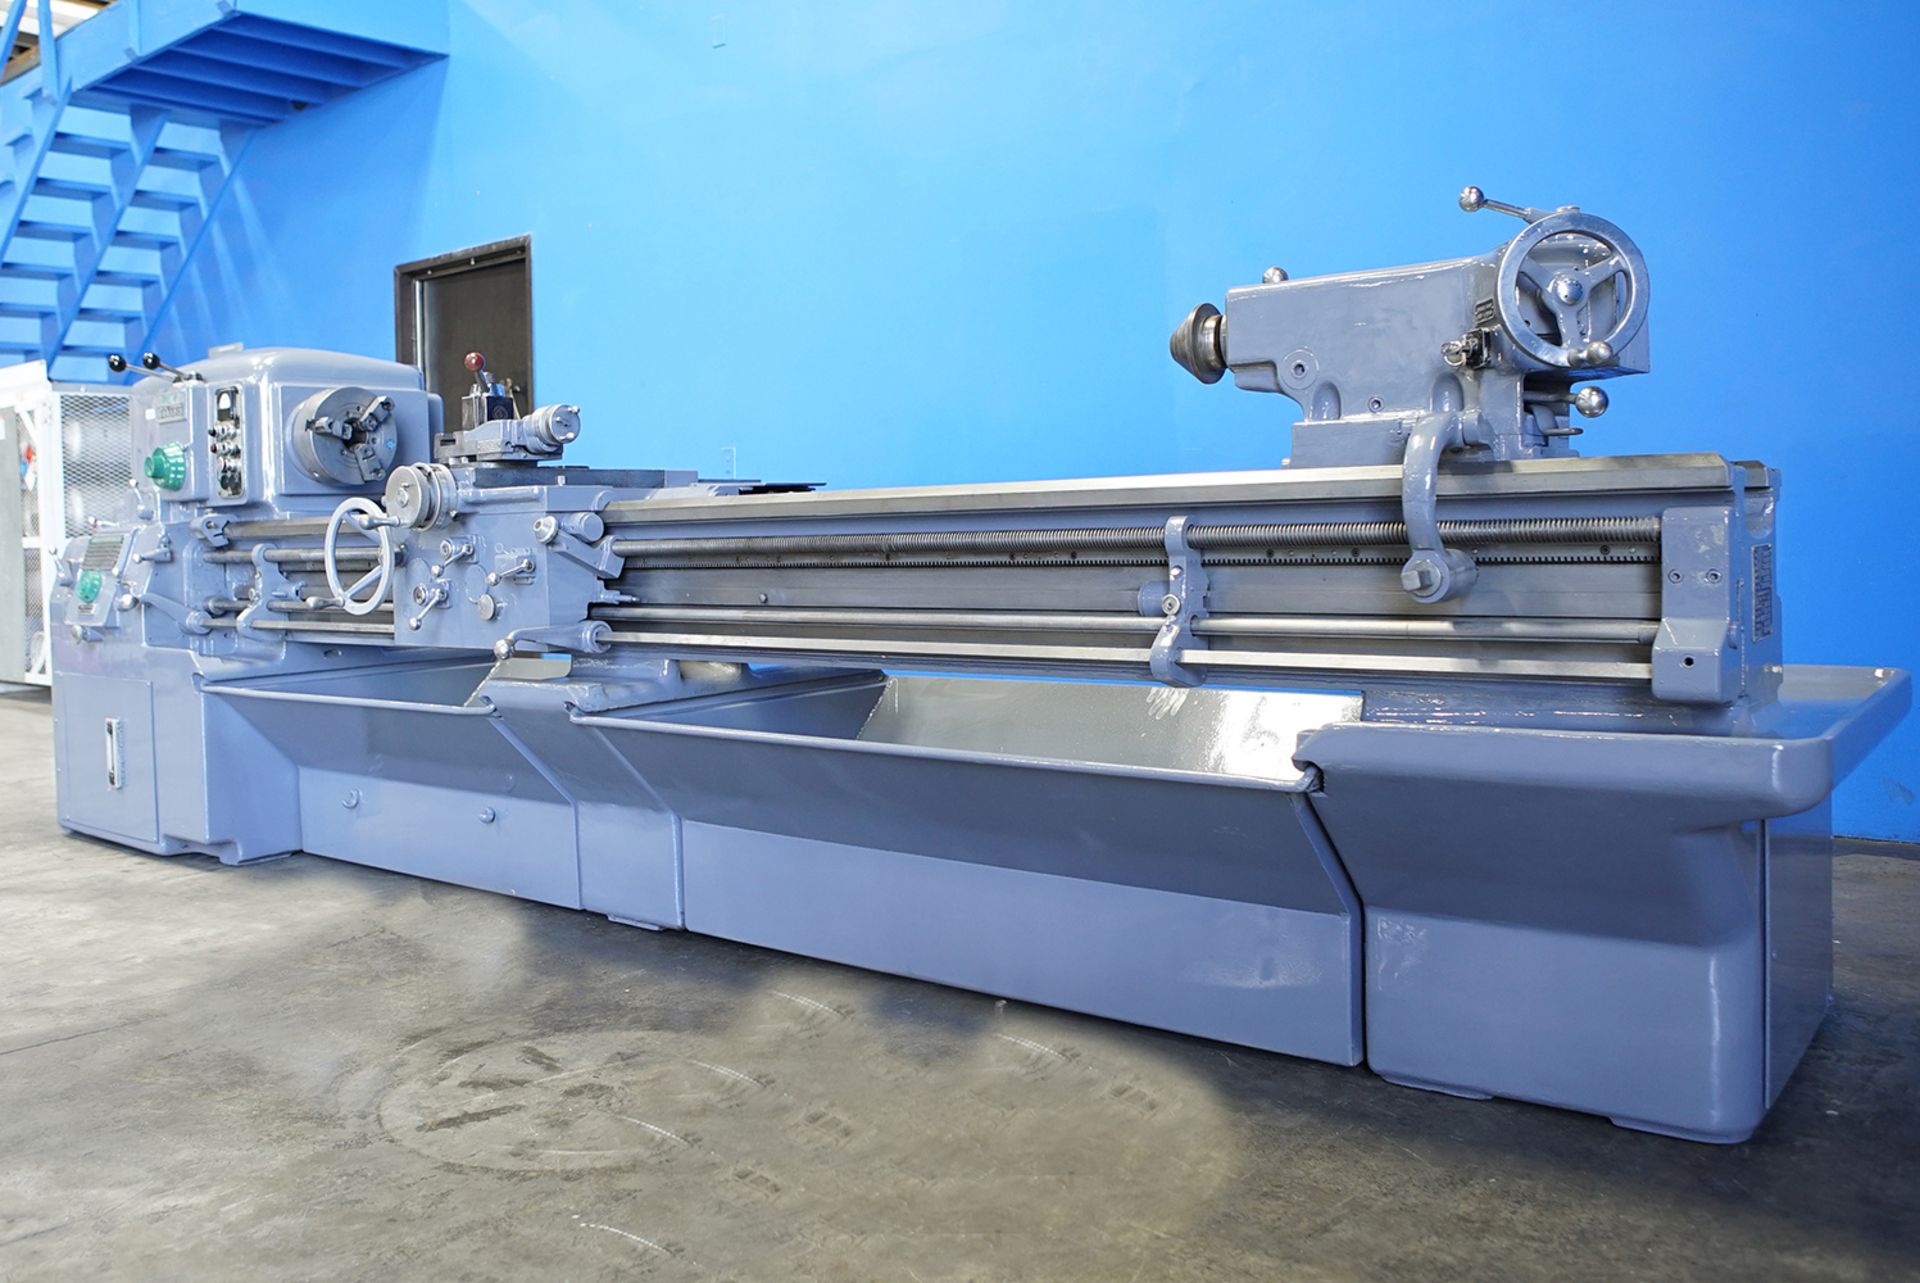 Monarch - Engine Lathe | 16" x 102", Located In Huntington Park, CA - #6430JVHP - Image 2 of 10